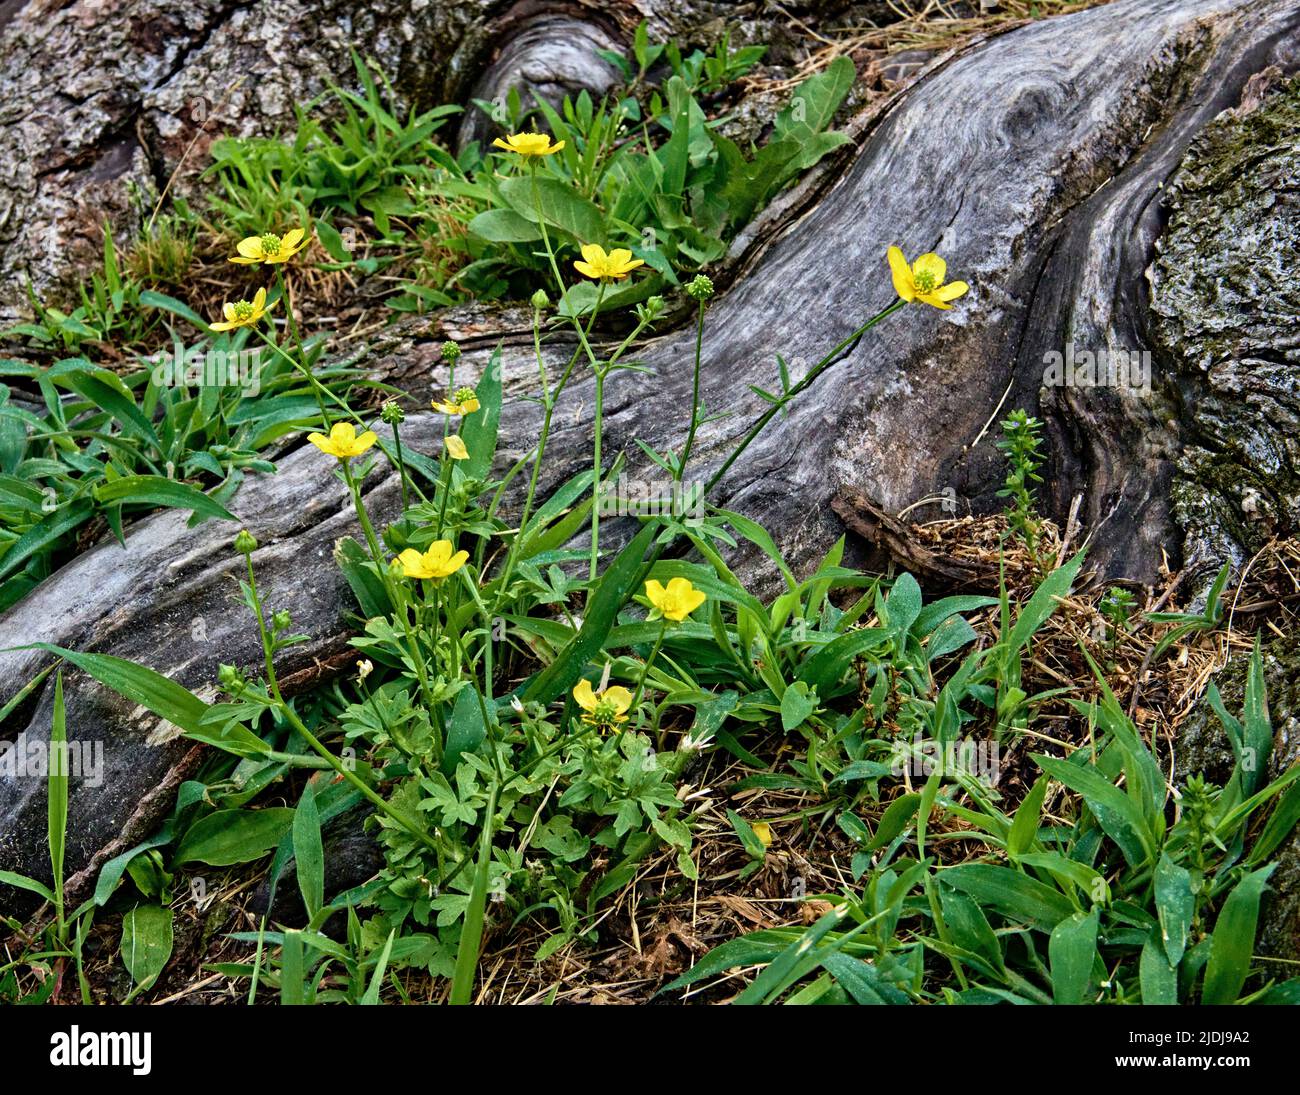 Meadow buttercups, tall buttercup, common buttercup and giant buttercup. A cute little yellow flower and sometimes called a garden weed. Stock Photo